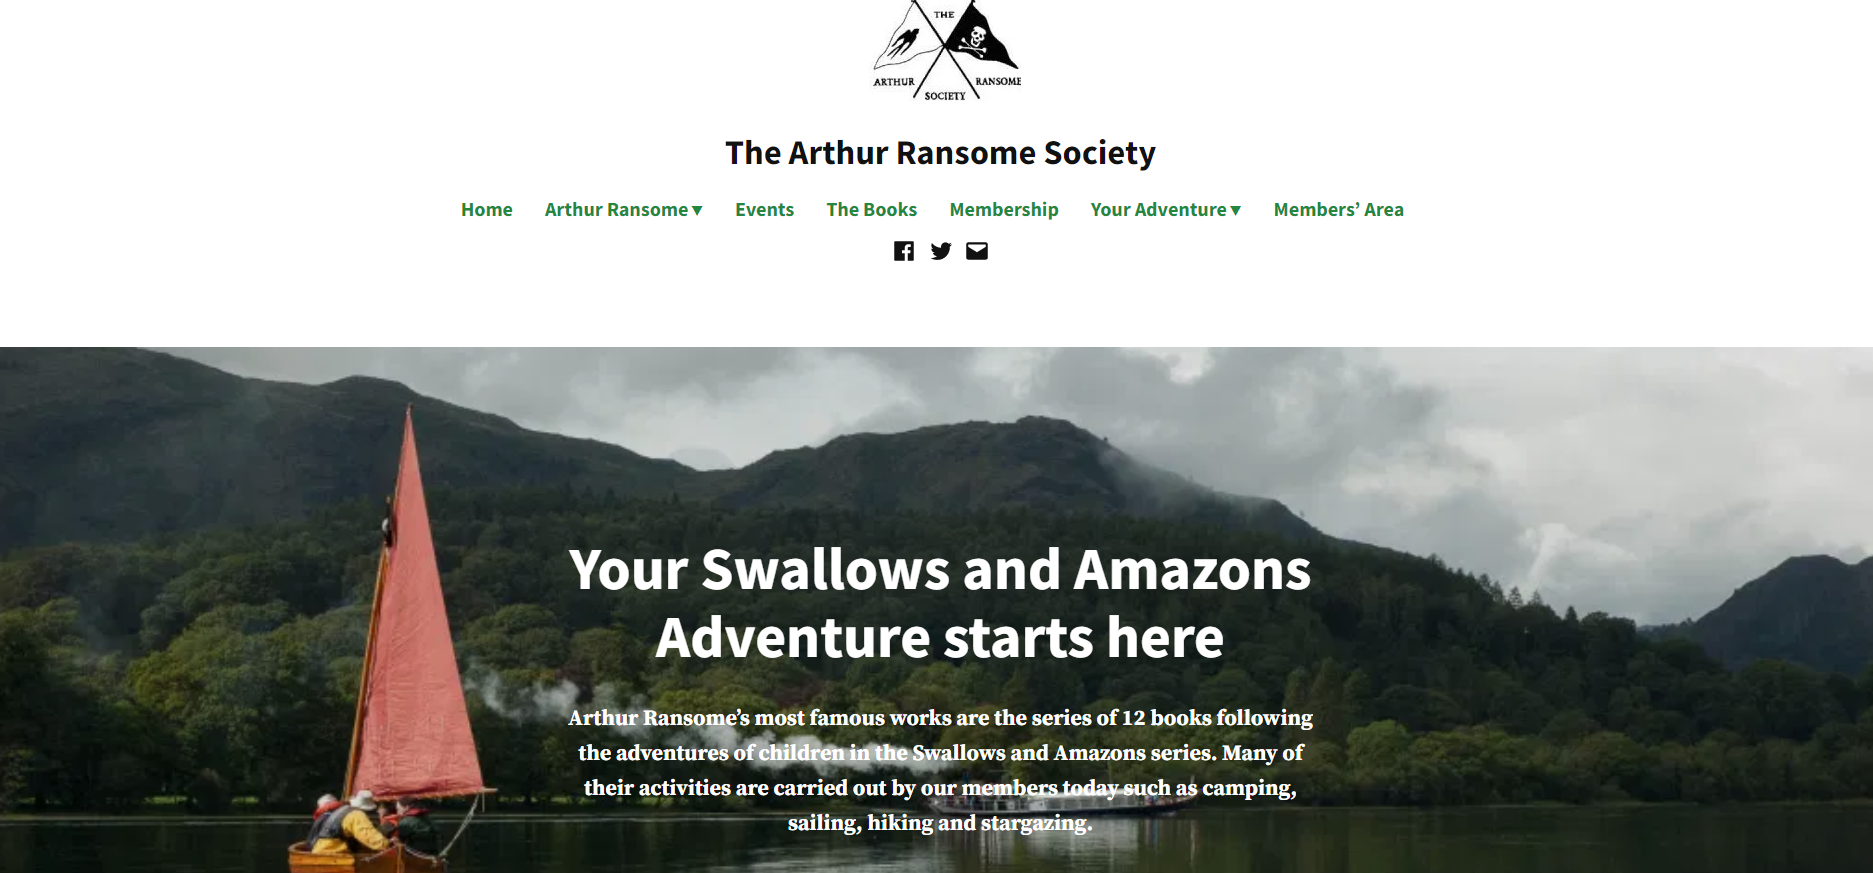 Screenshot of The Arthur Ransome Society Website